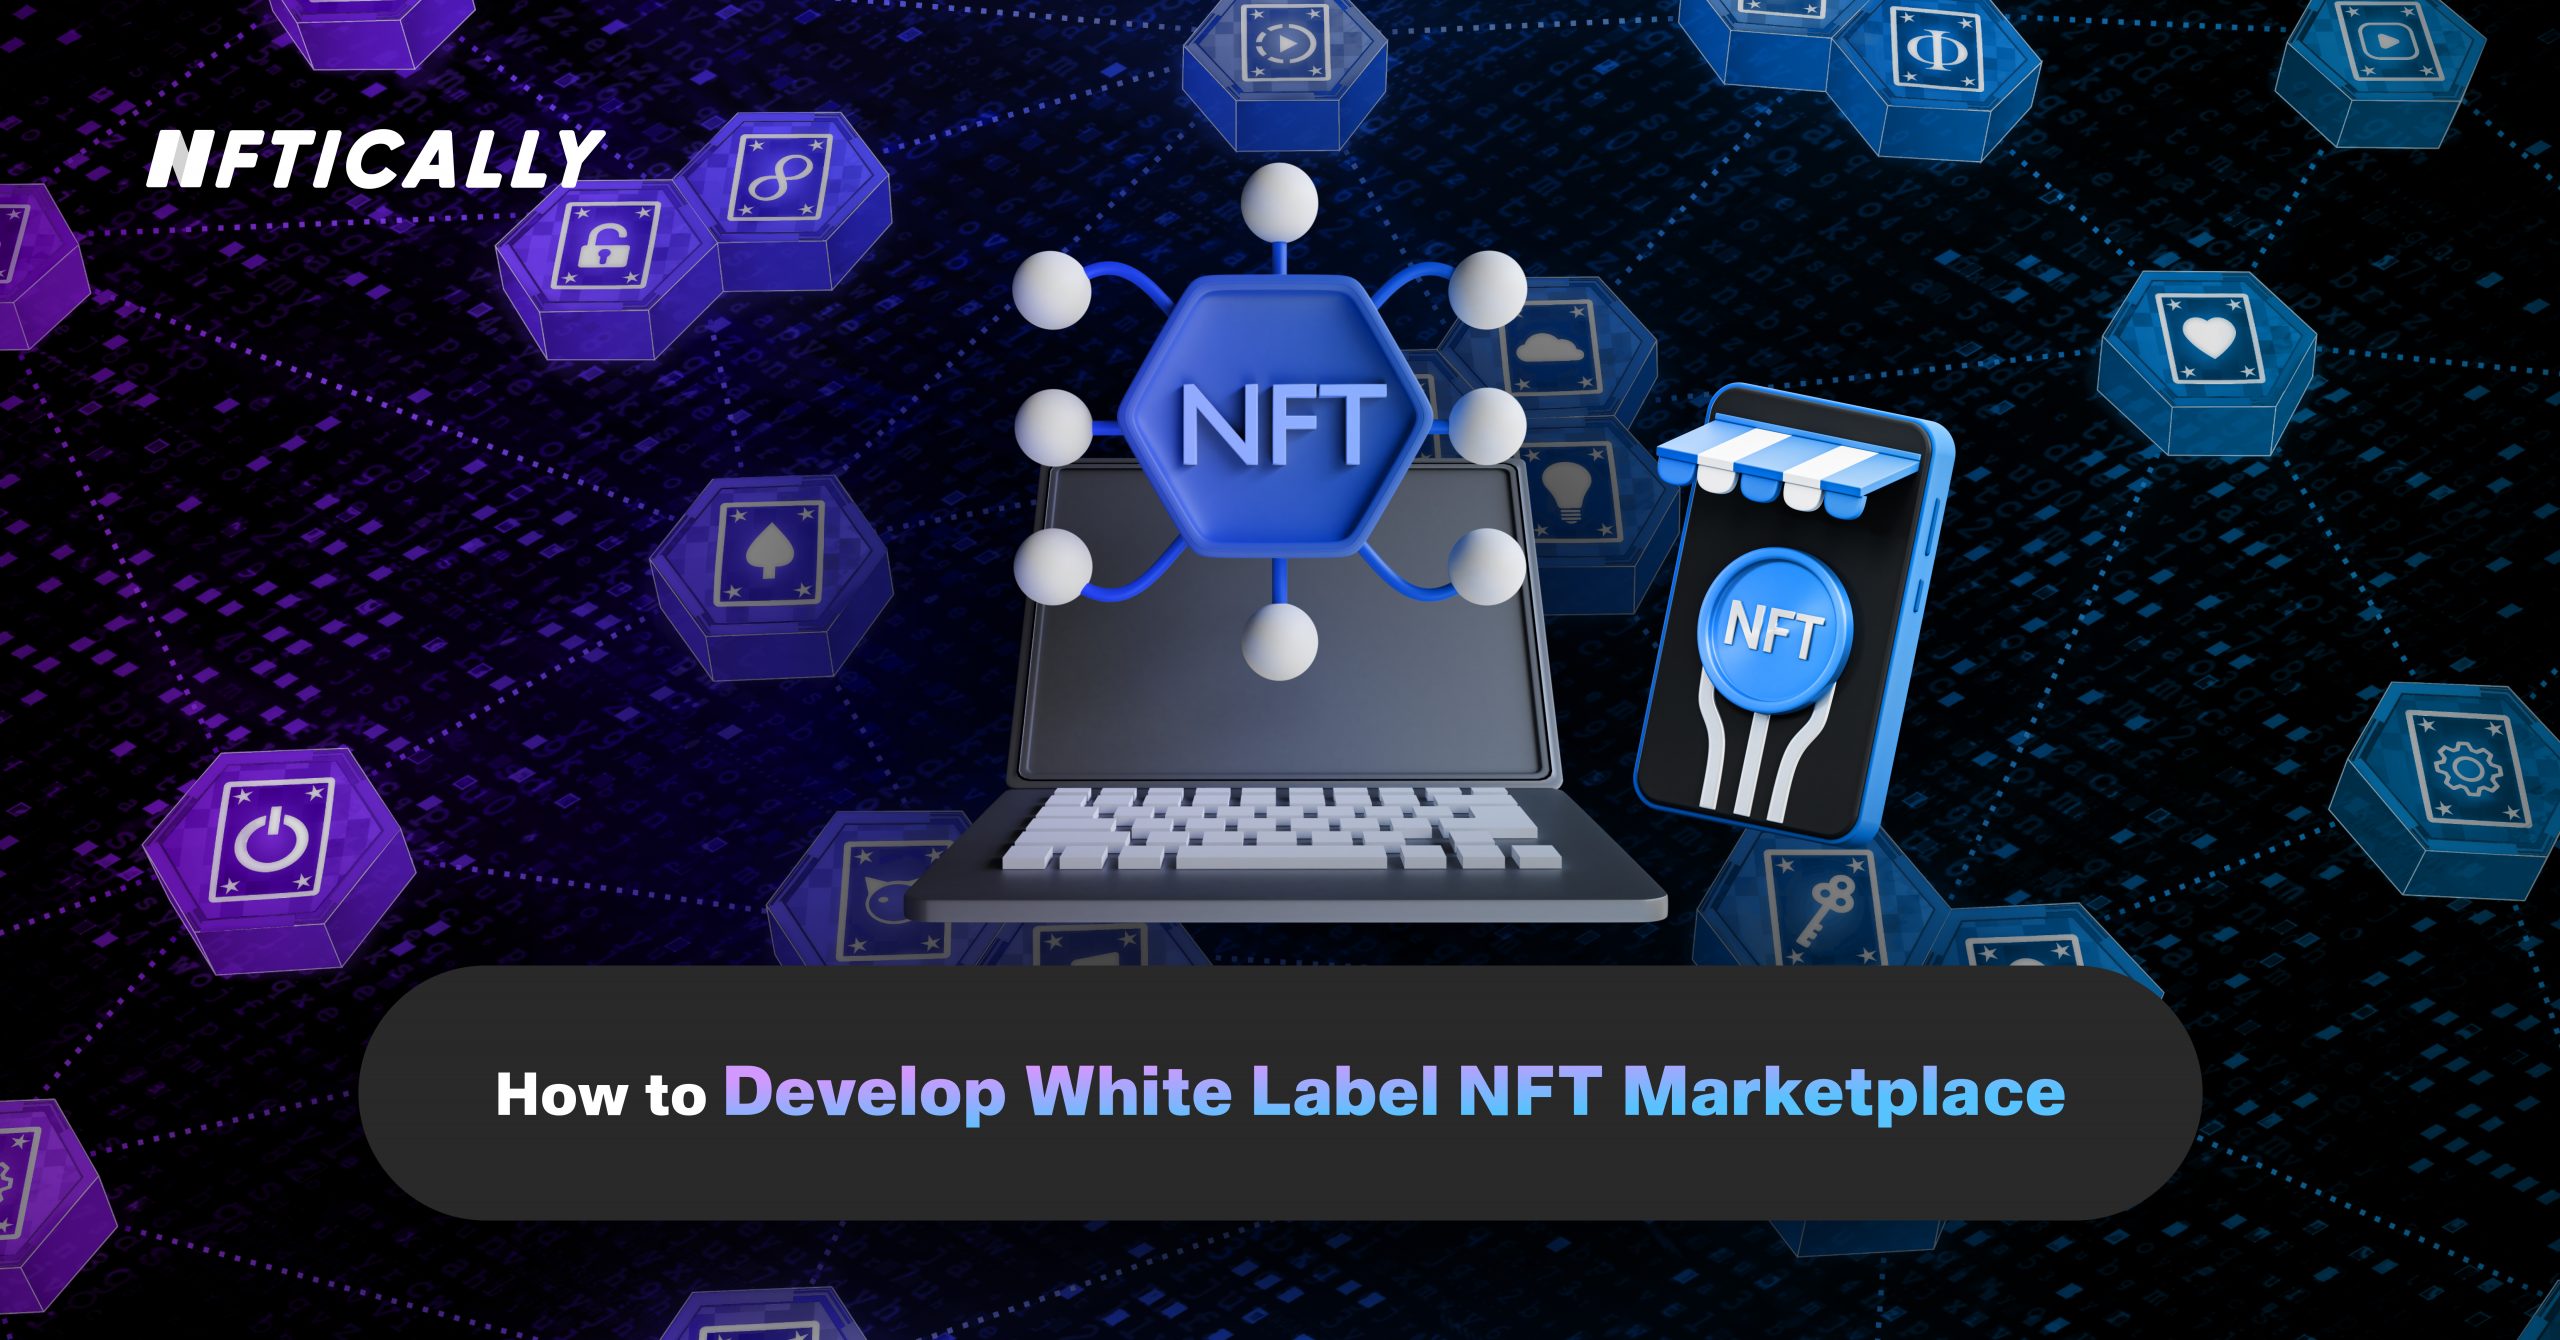 How to Develop White Label NFT Marketplace